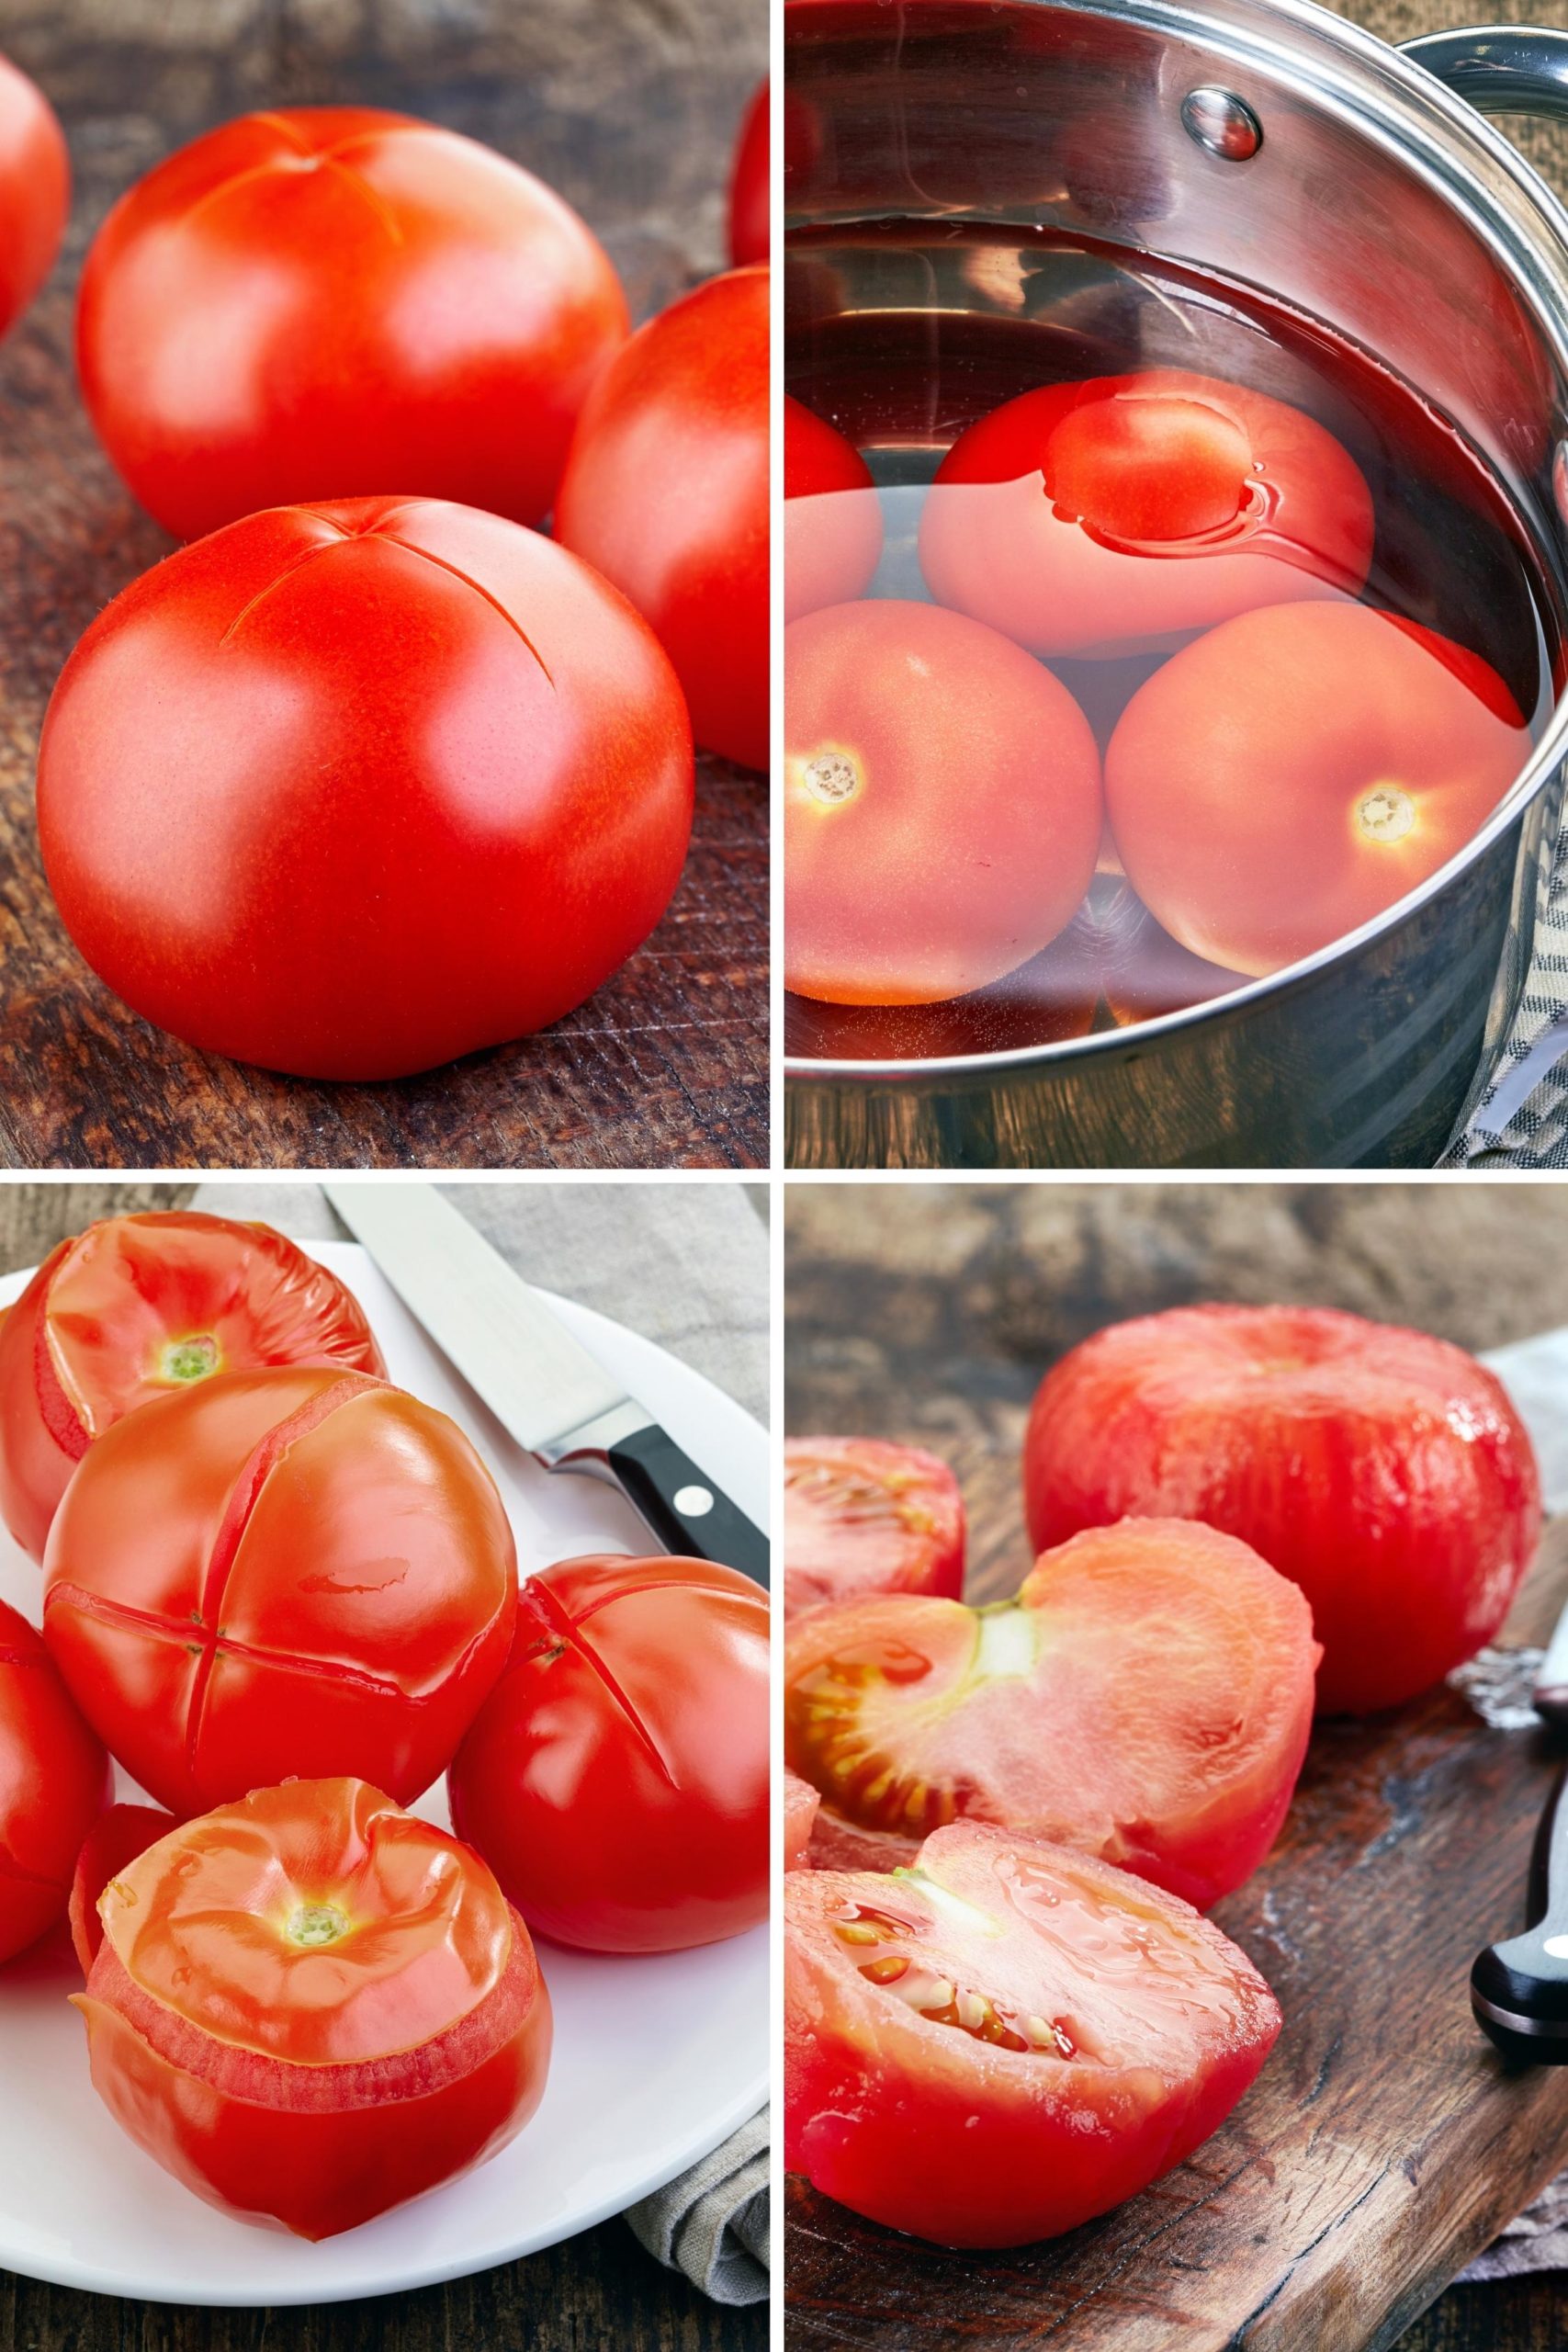 https://www.goodlifeeats.com/wp-content/uploads/2022/05/How-to-Blanch-Tomatoes-for-Freezing-scaled.jpg